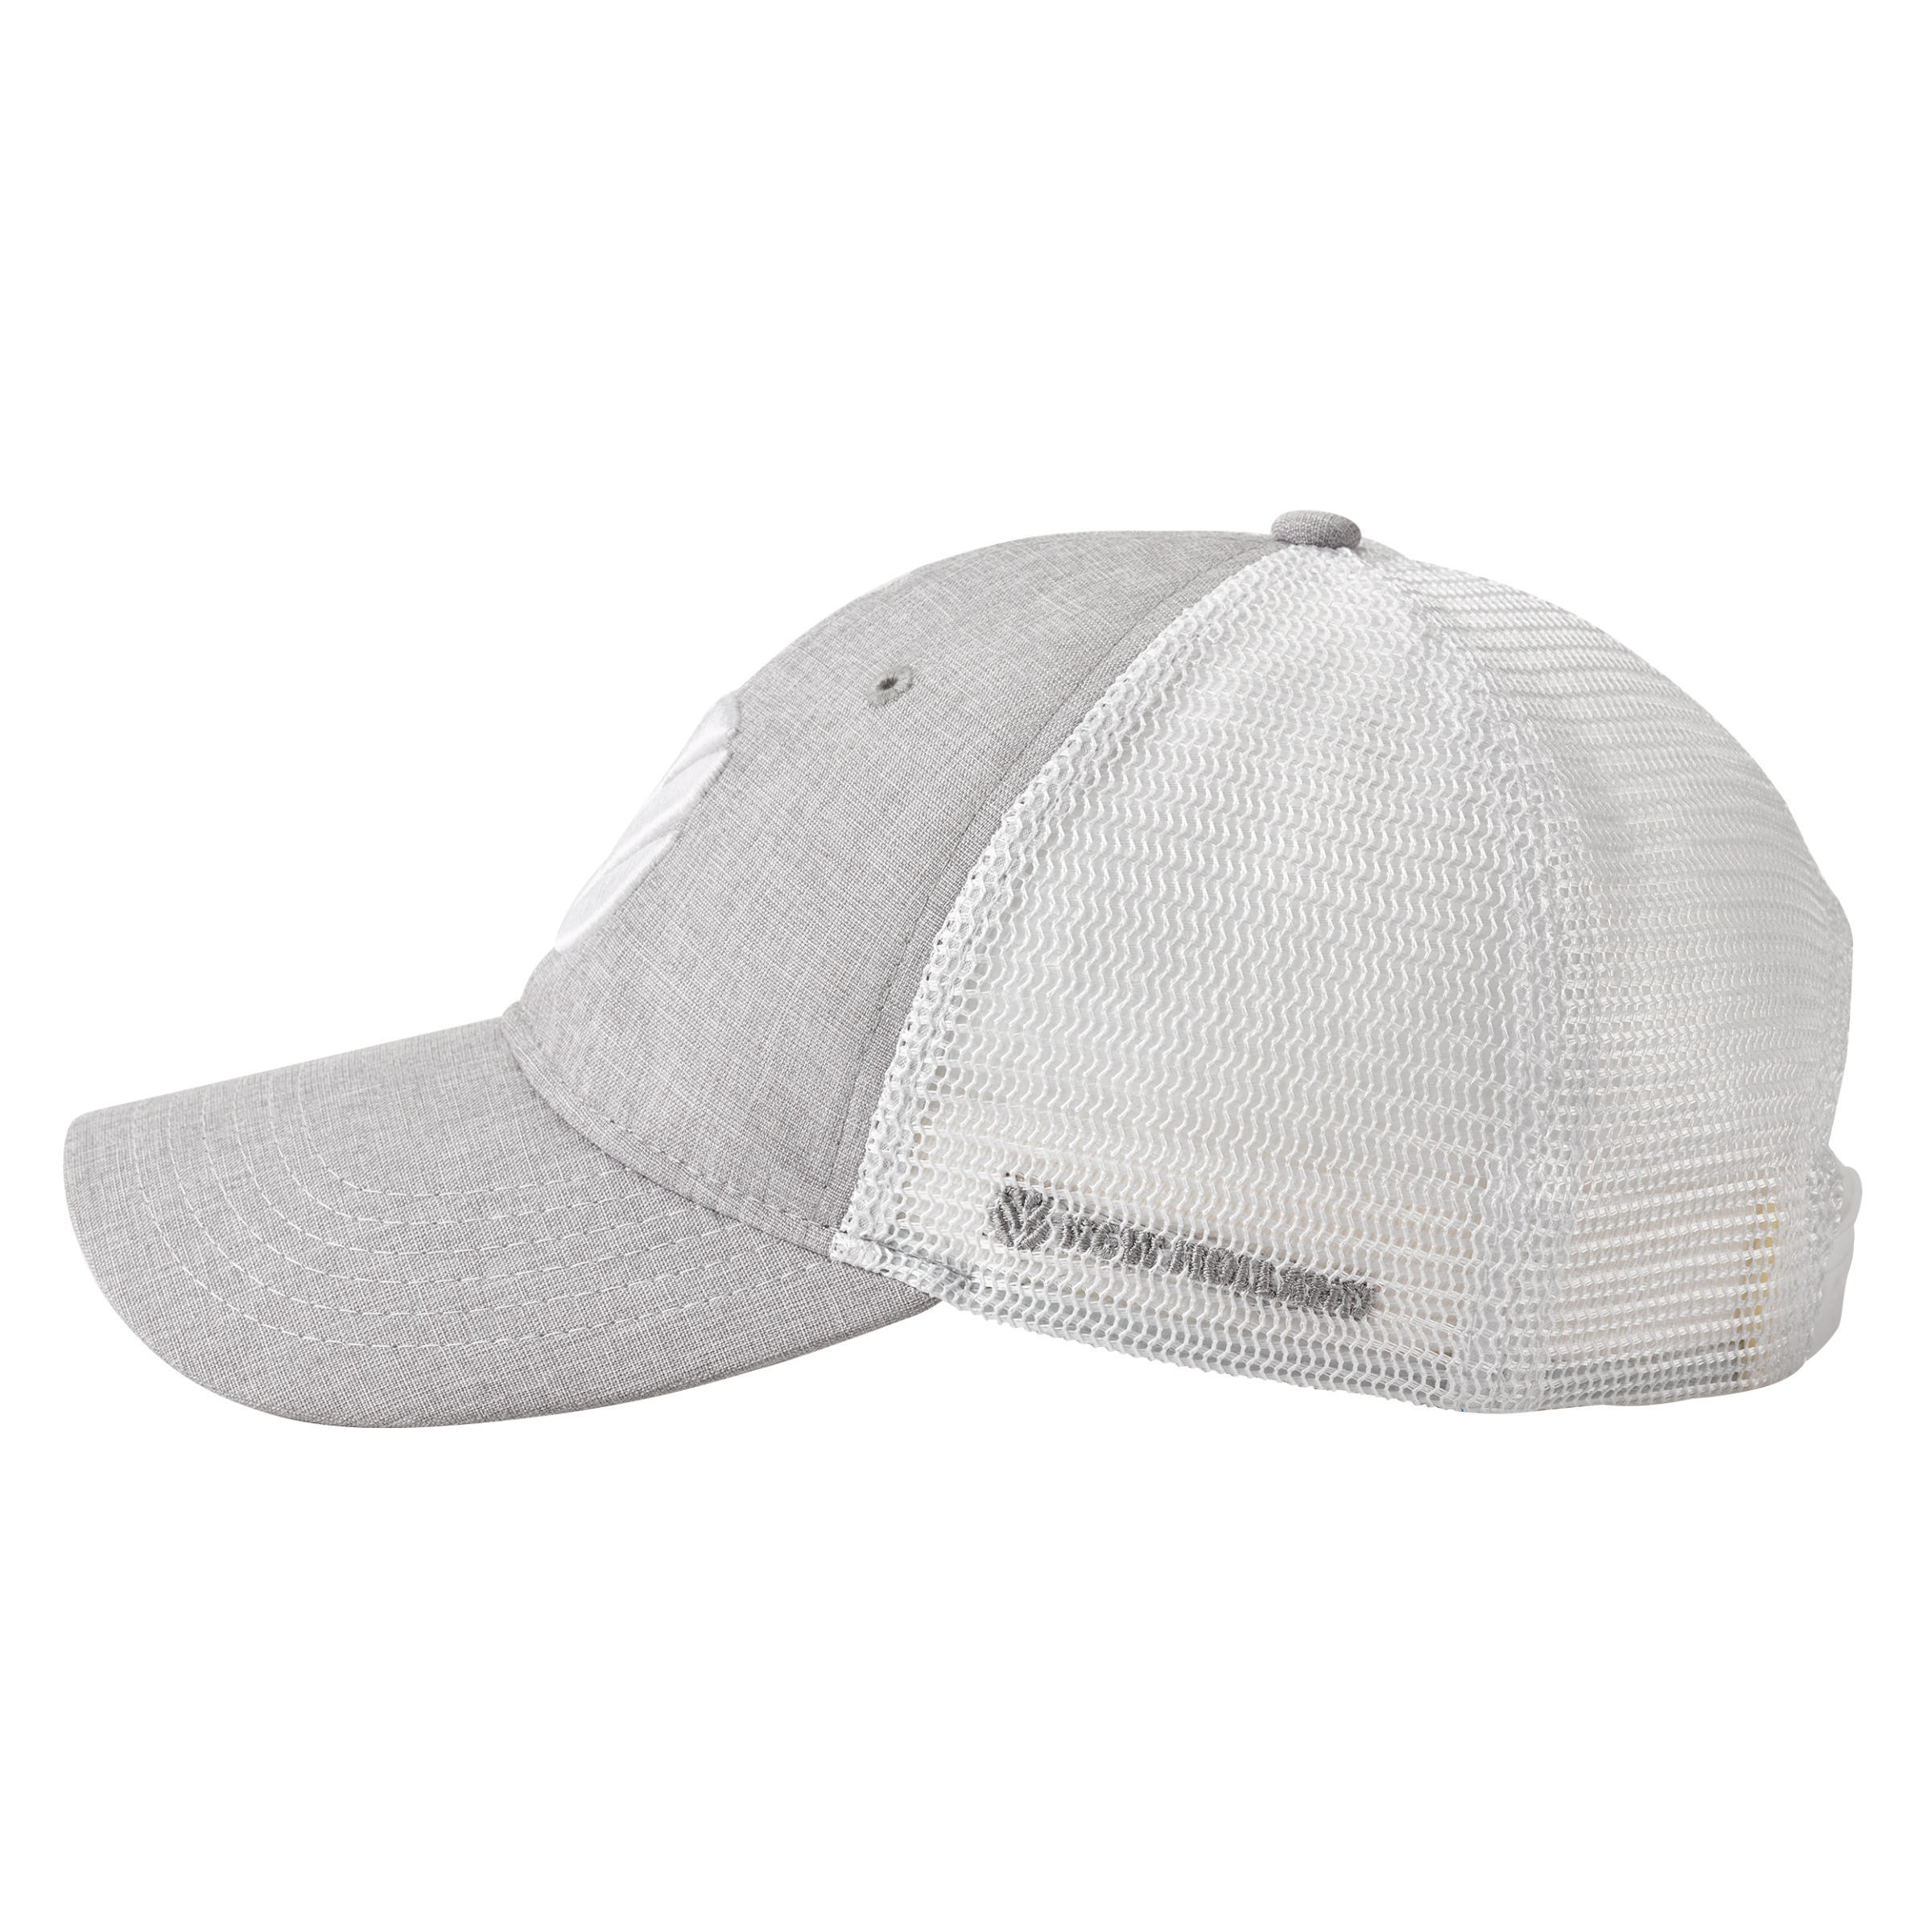 Apparel & Collectibles #200366119 New Holland Suiting Golf Cap image 2